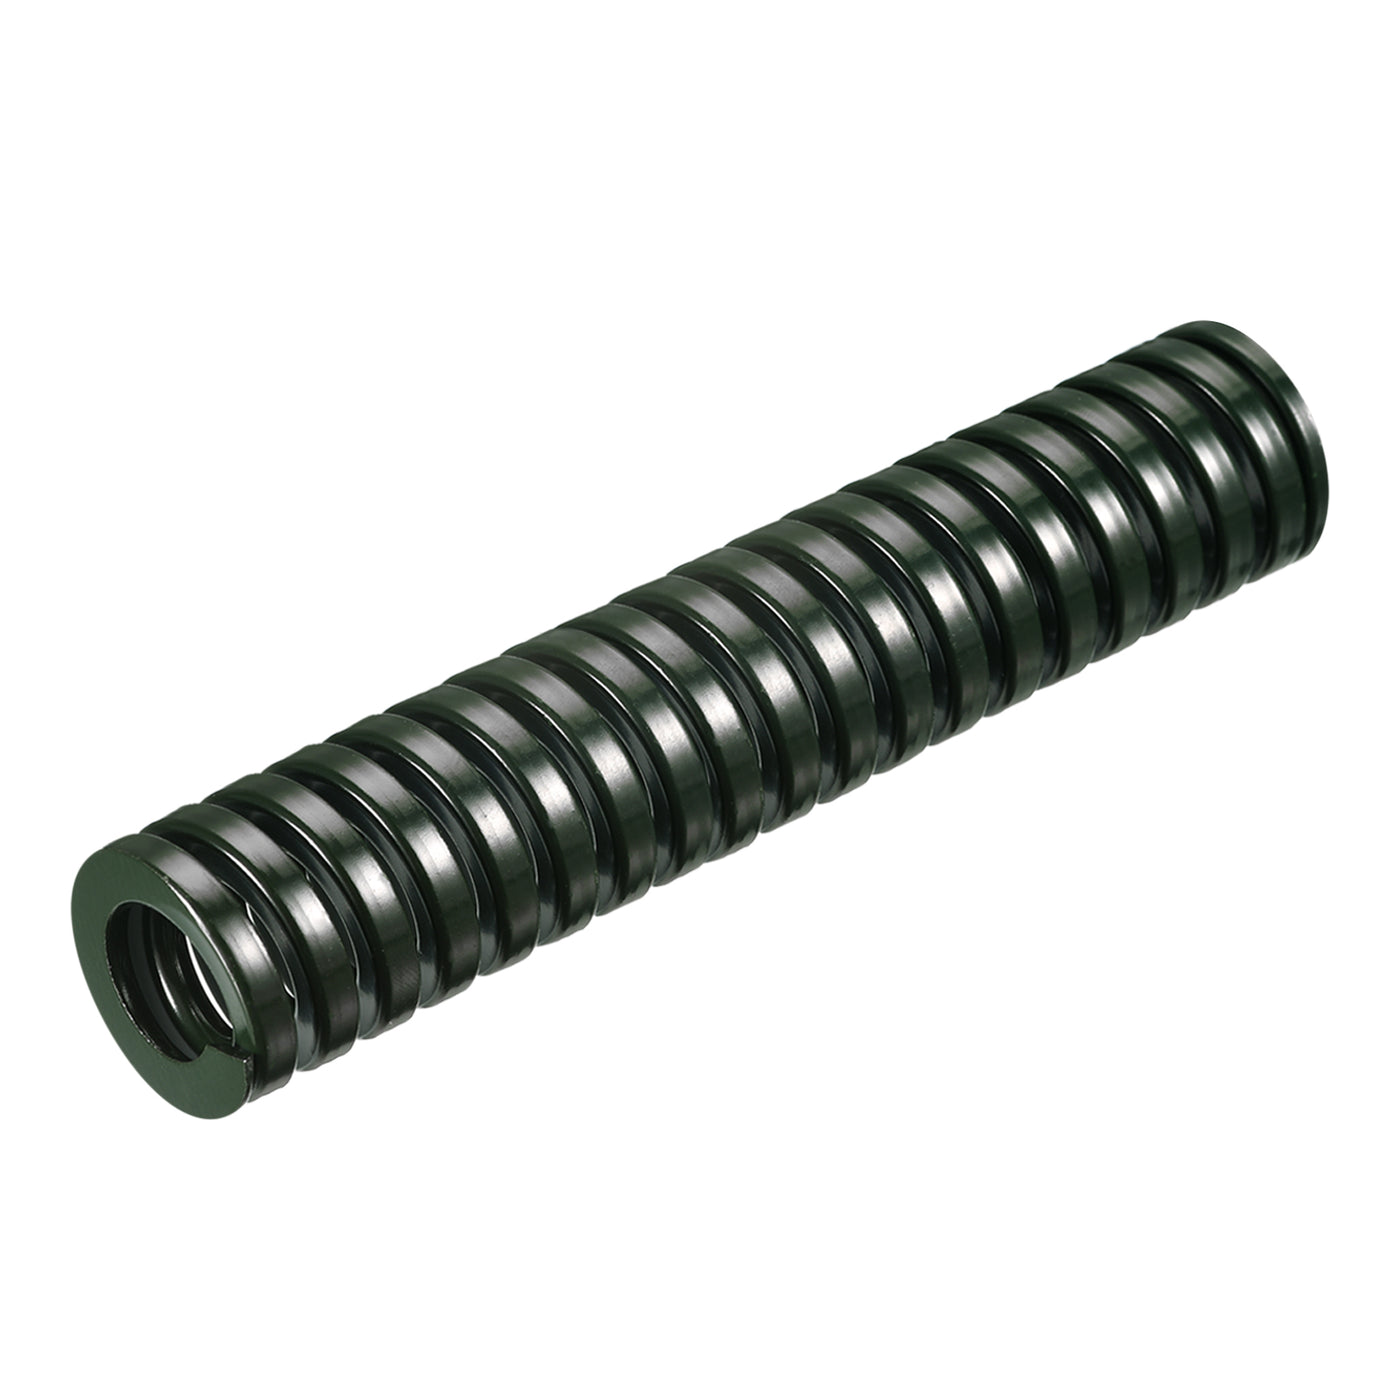 uxcell Uxcell 3D Printer Die Spring, 1pcs 30mm OD 150mm Long Spiral Stamping Compression Green